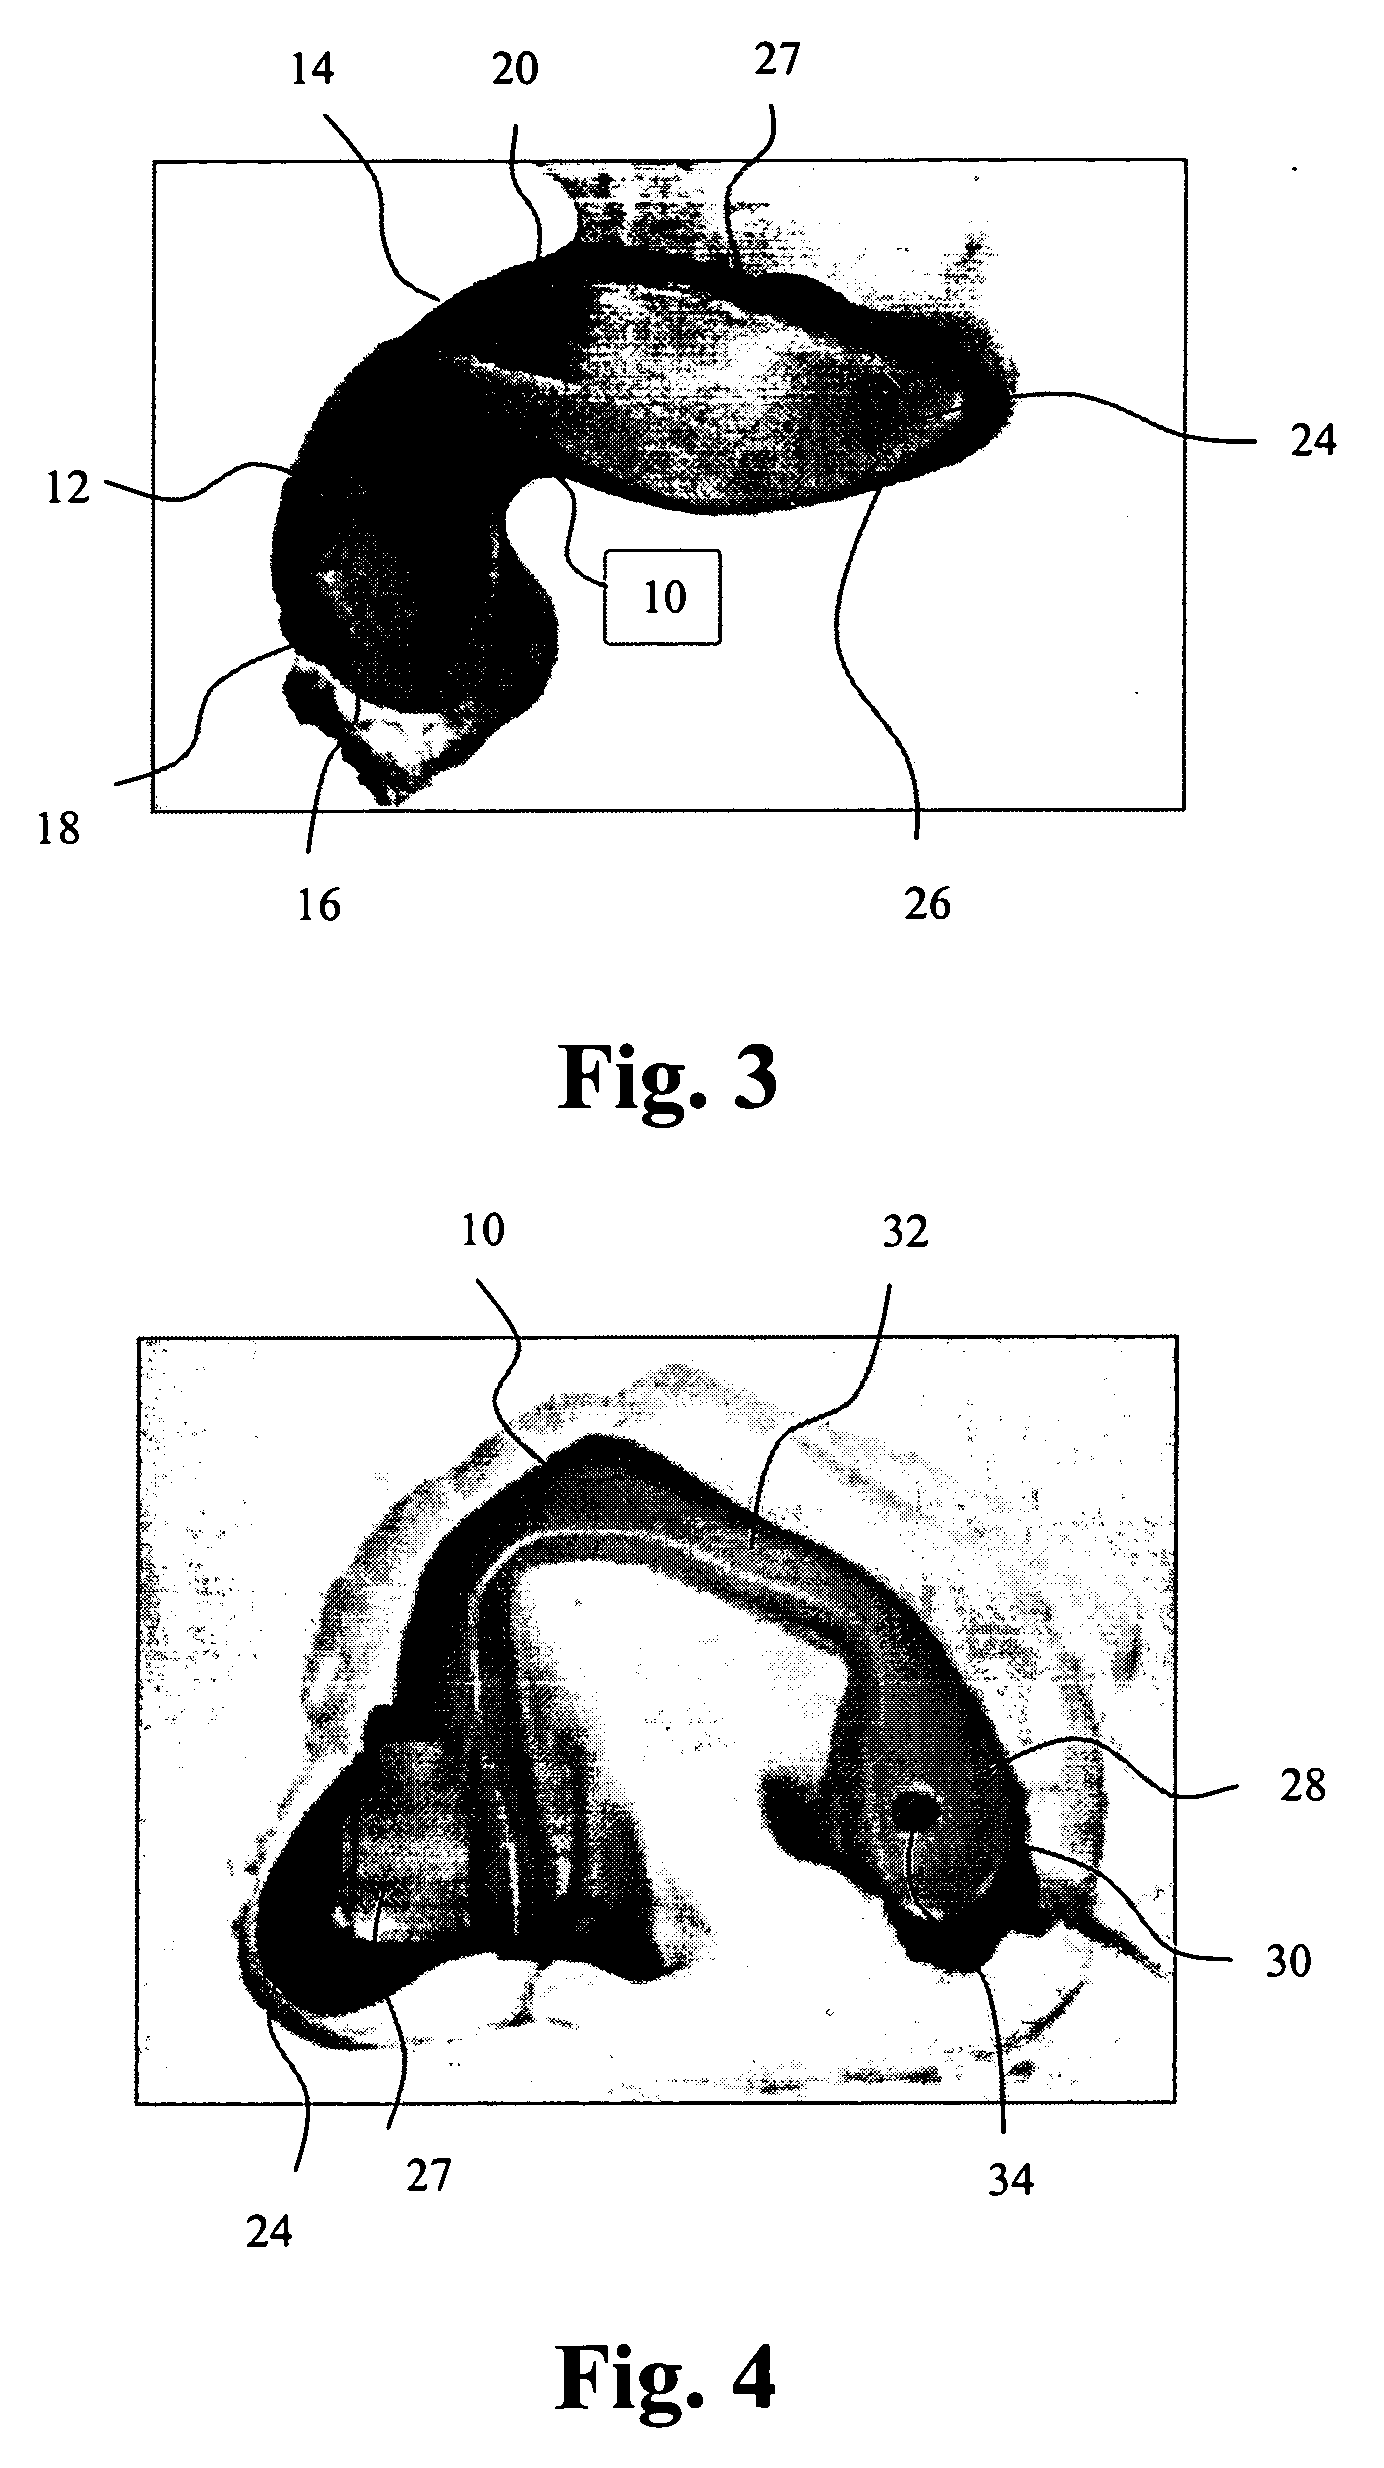 Open in-the-ear (ITE) hearing aid